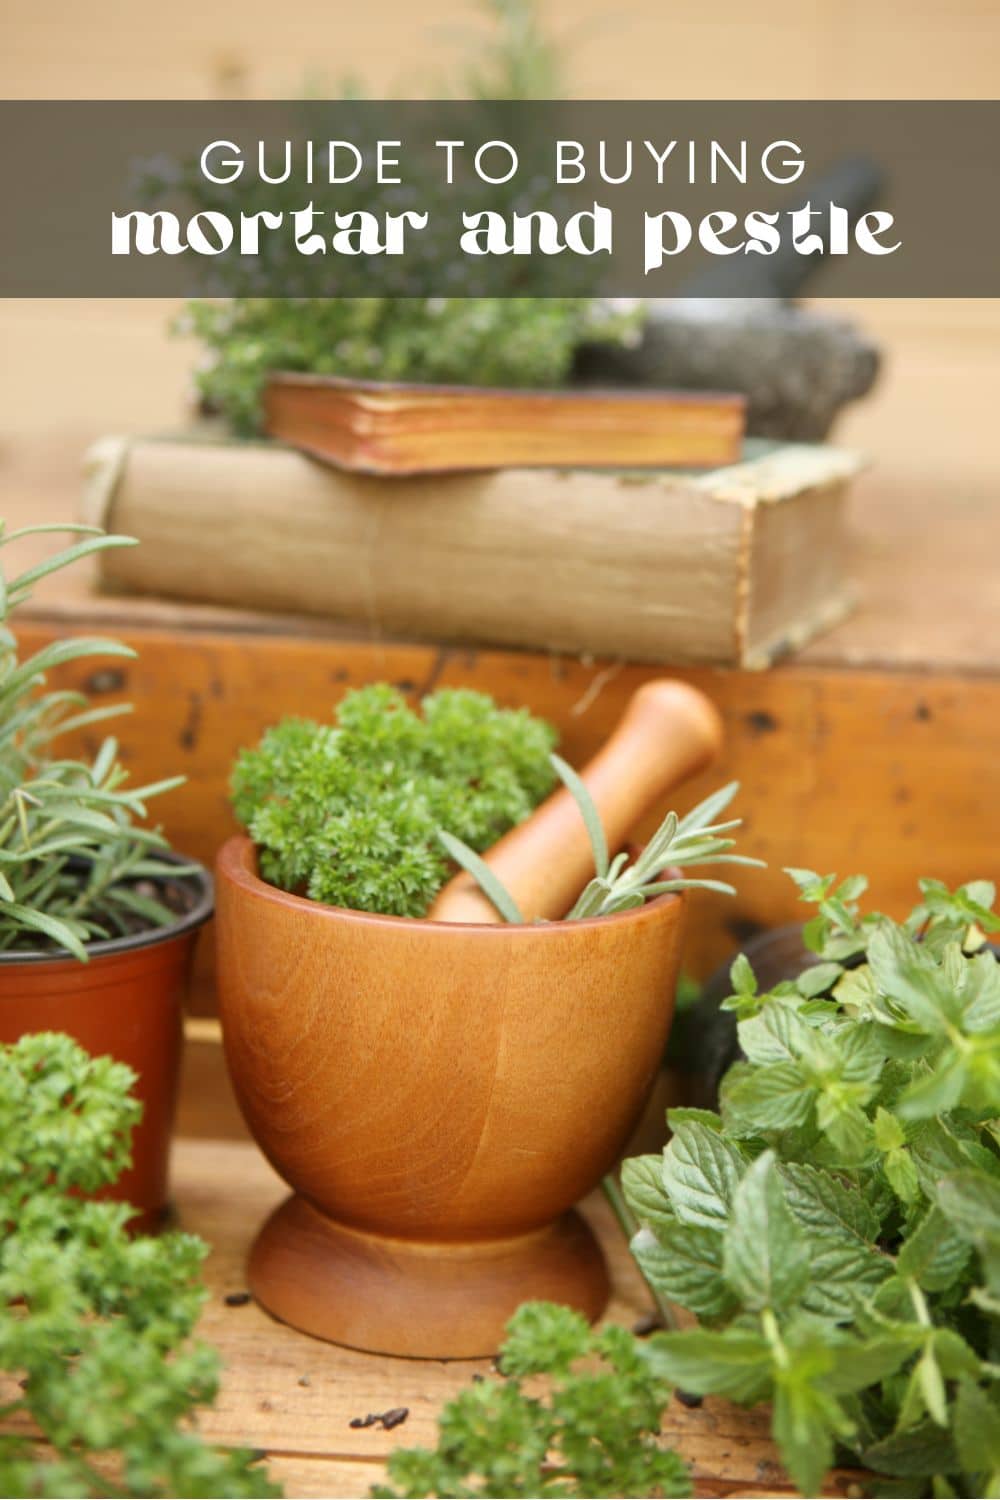 A mortar and pestle is an ancient tool used to grind herbs, spices, and other solid ingredients into powders or pastes. Today, it remains a popular choice for cooking enthusiasts looking to get the most flavor out of their ingredients. 